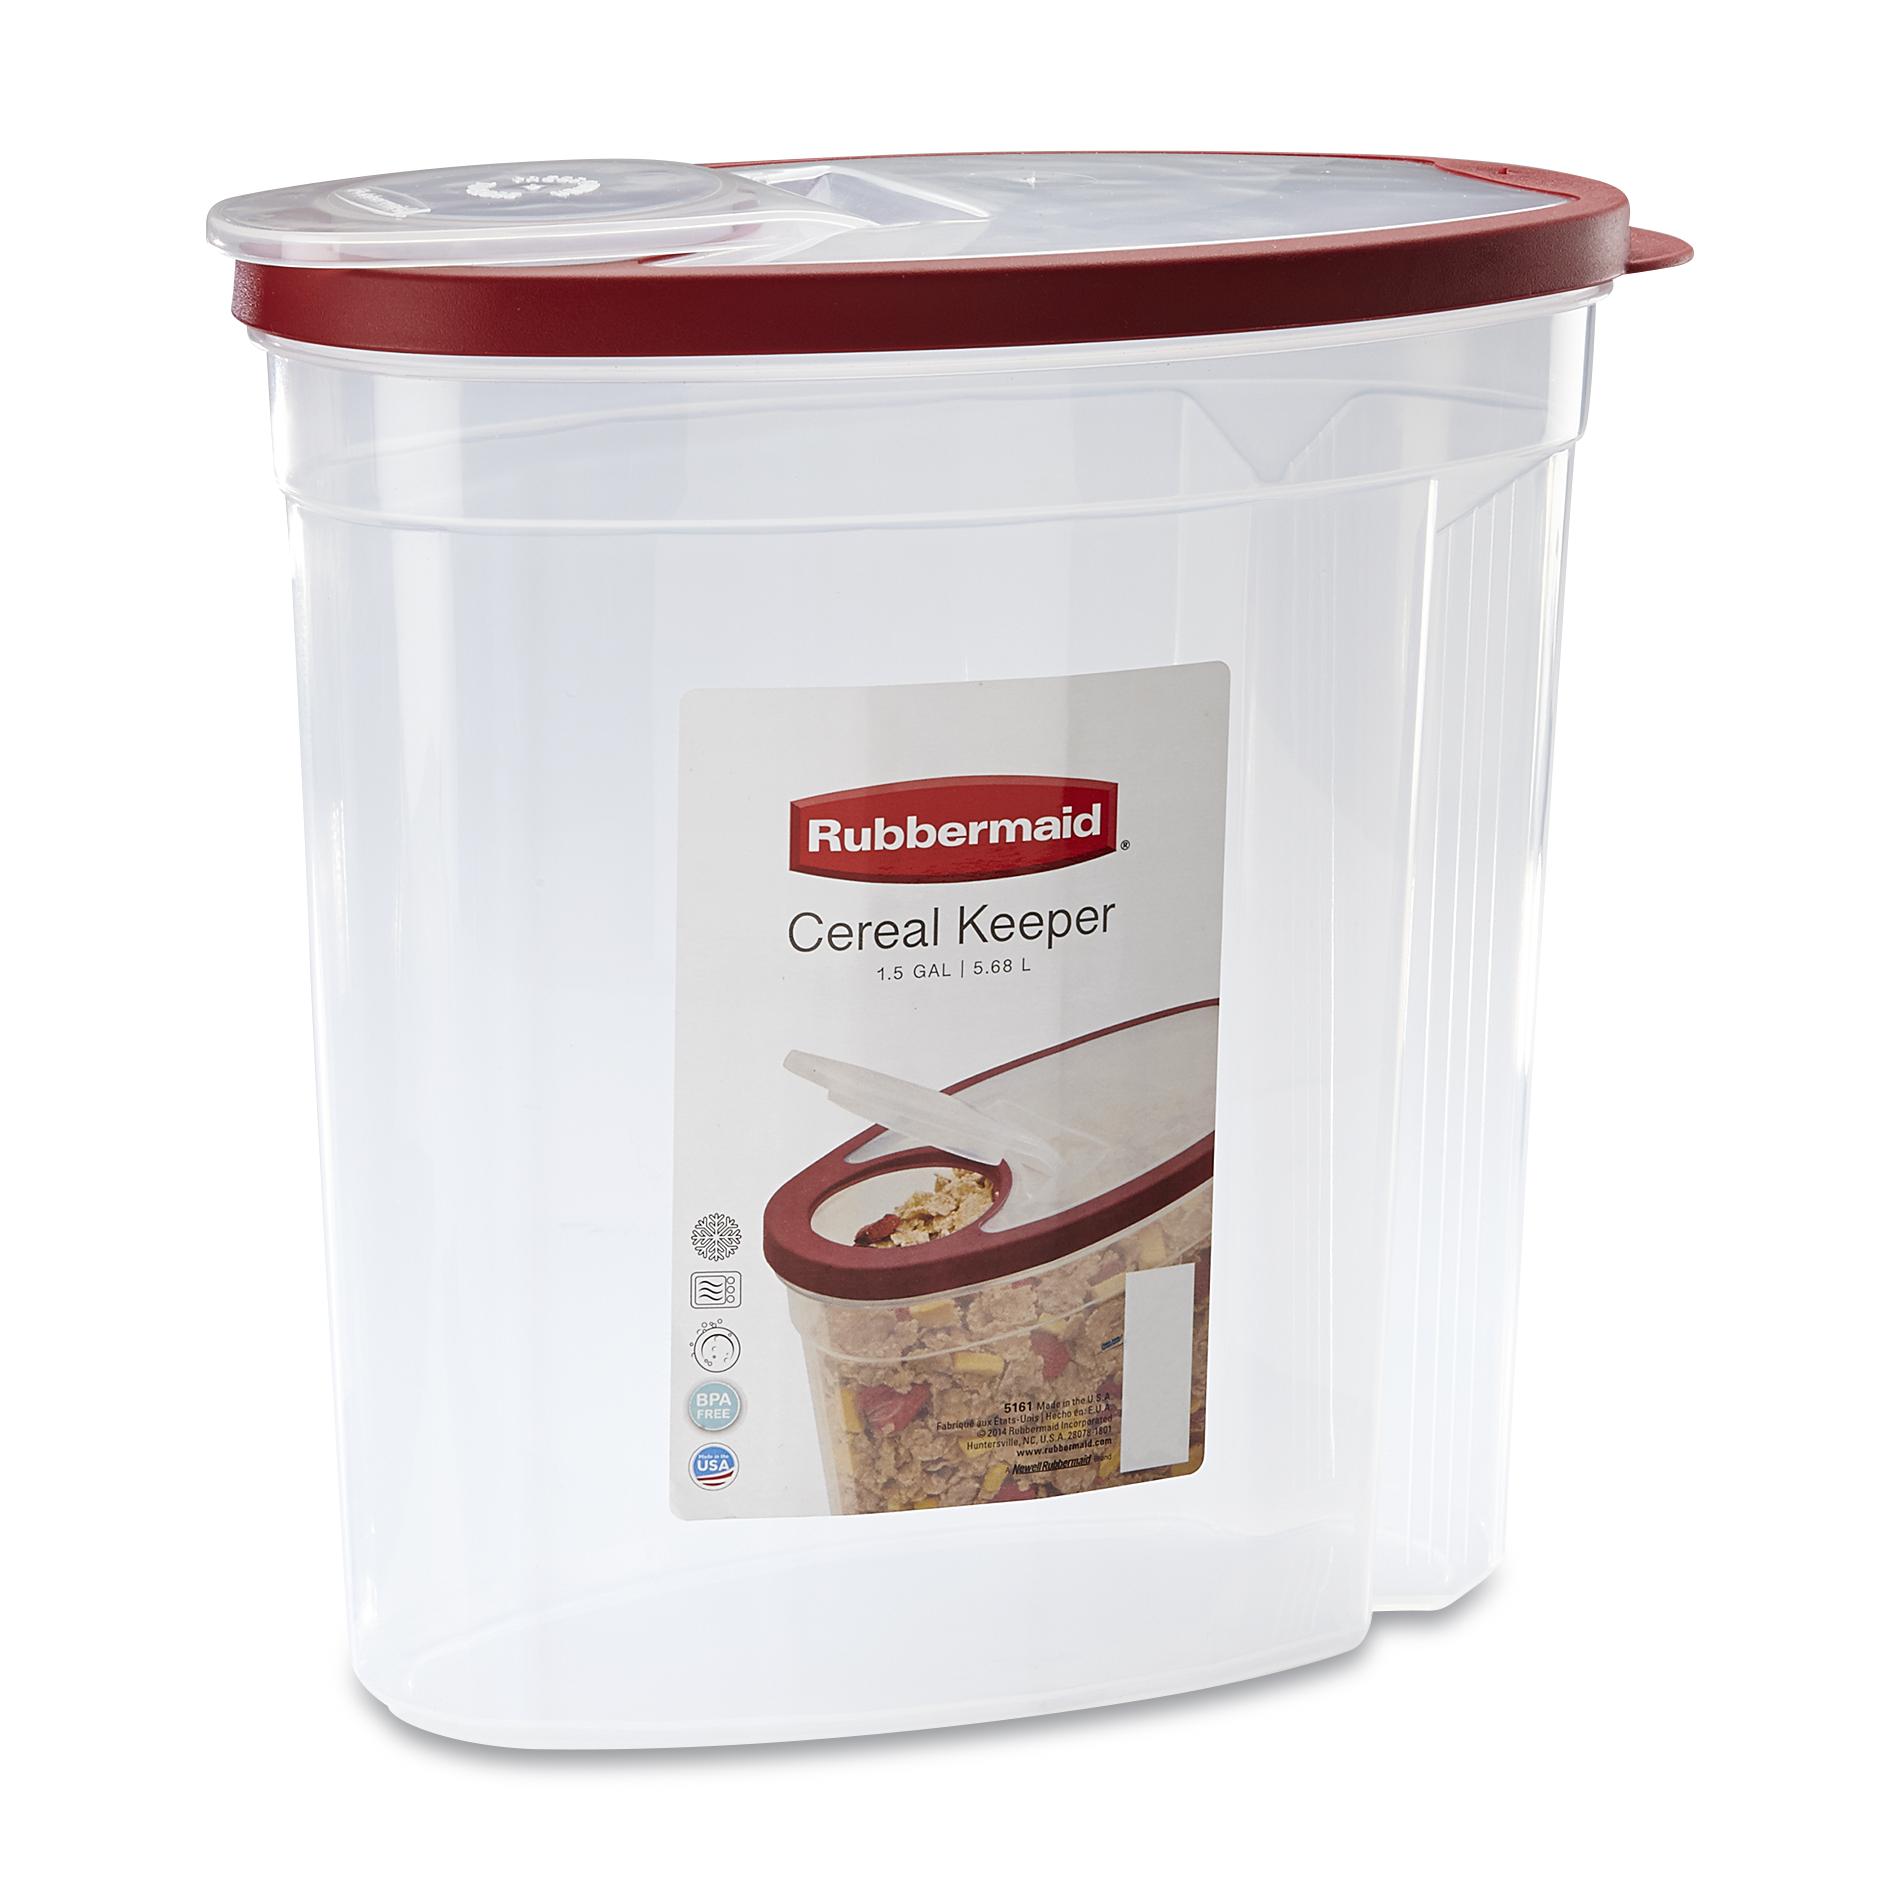 Rubbermaid Flex and Seal Cereal Keeper Food Storage Container, 1.5  Gallon/5.68 L